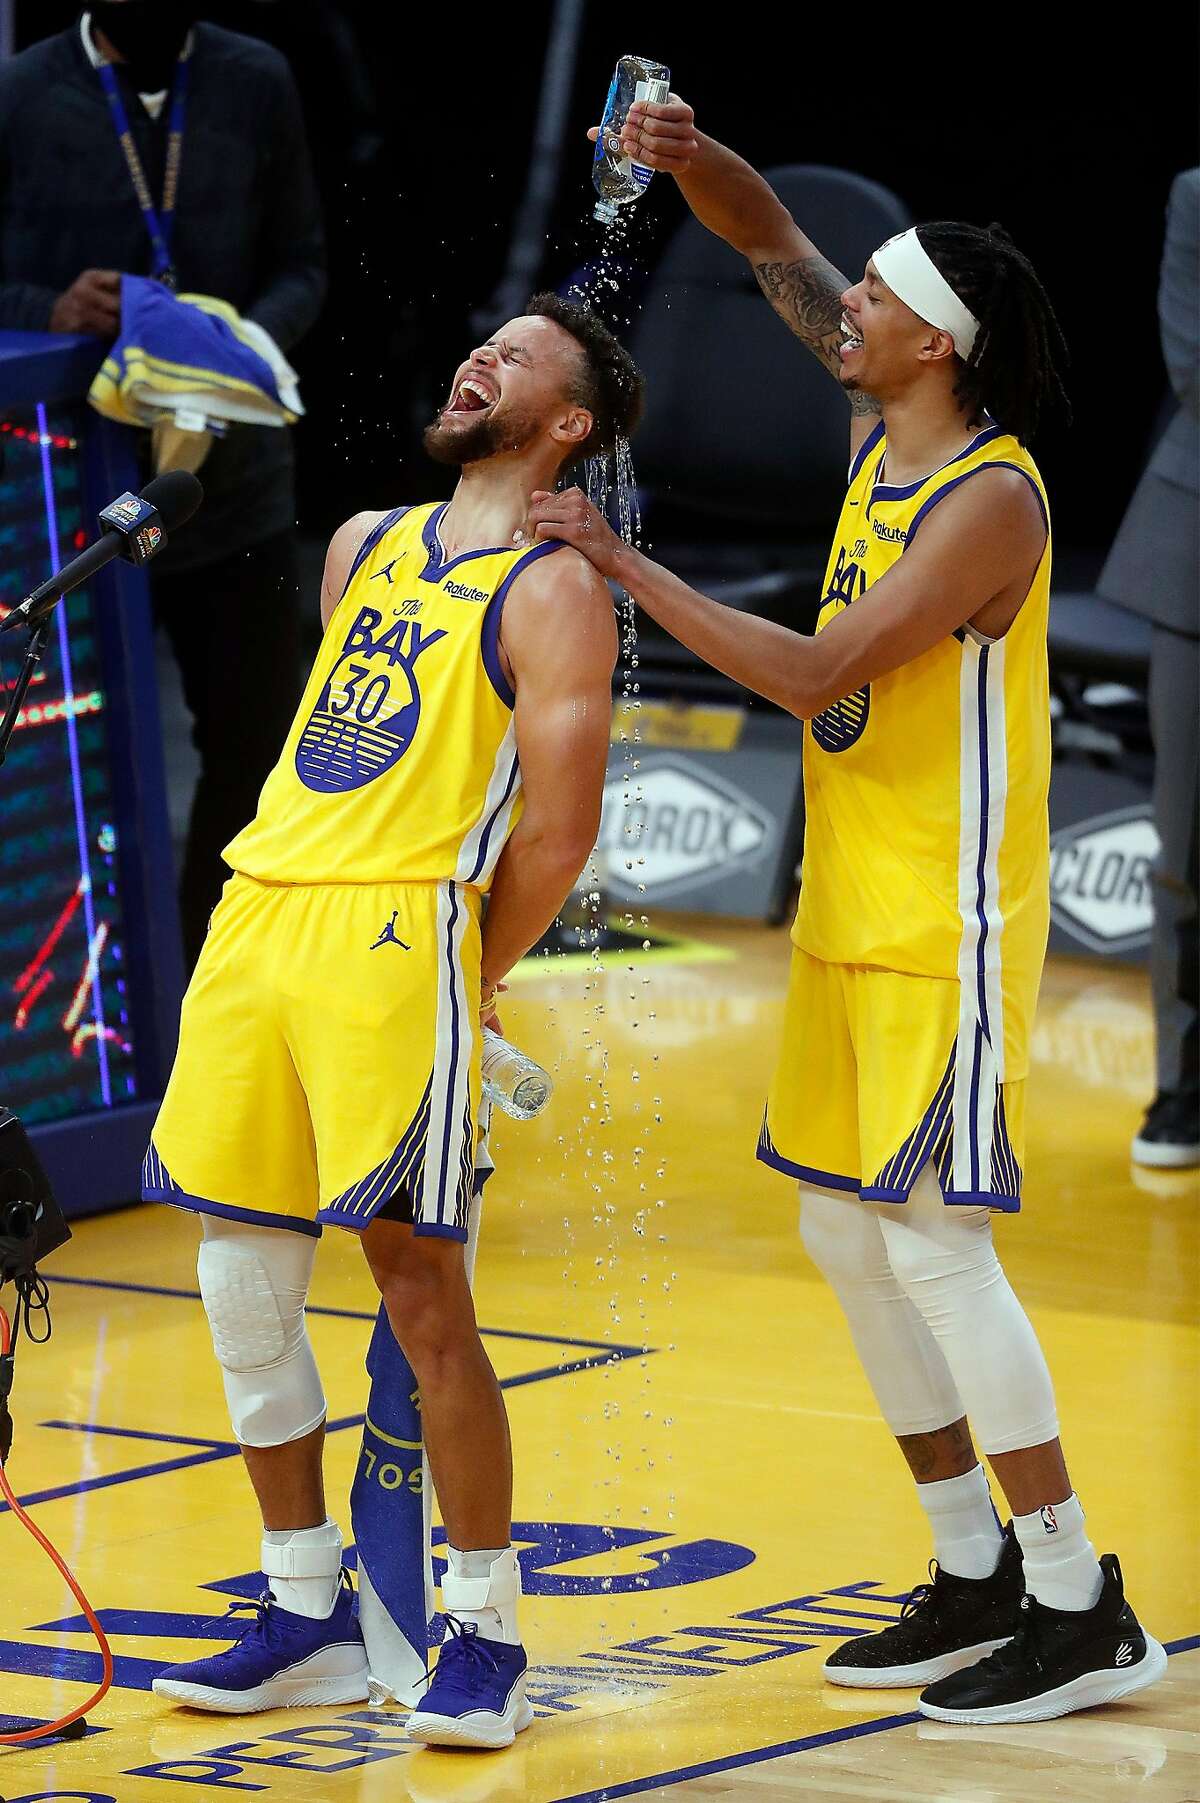 After scoring a career high 62 points, Golden State Warriors' Stephen Curry gets a bottle of water poured on him by Damion Lee after Warriors' 137-122 win over Portland Trail Blazers in NBA game at Chase Center in San Francisco, Calif., on Sunday, January 3, 2021.